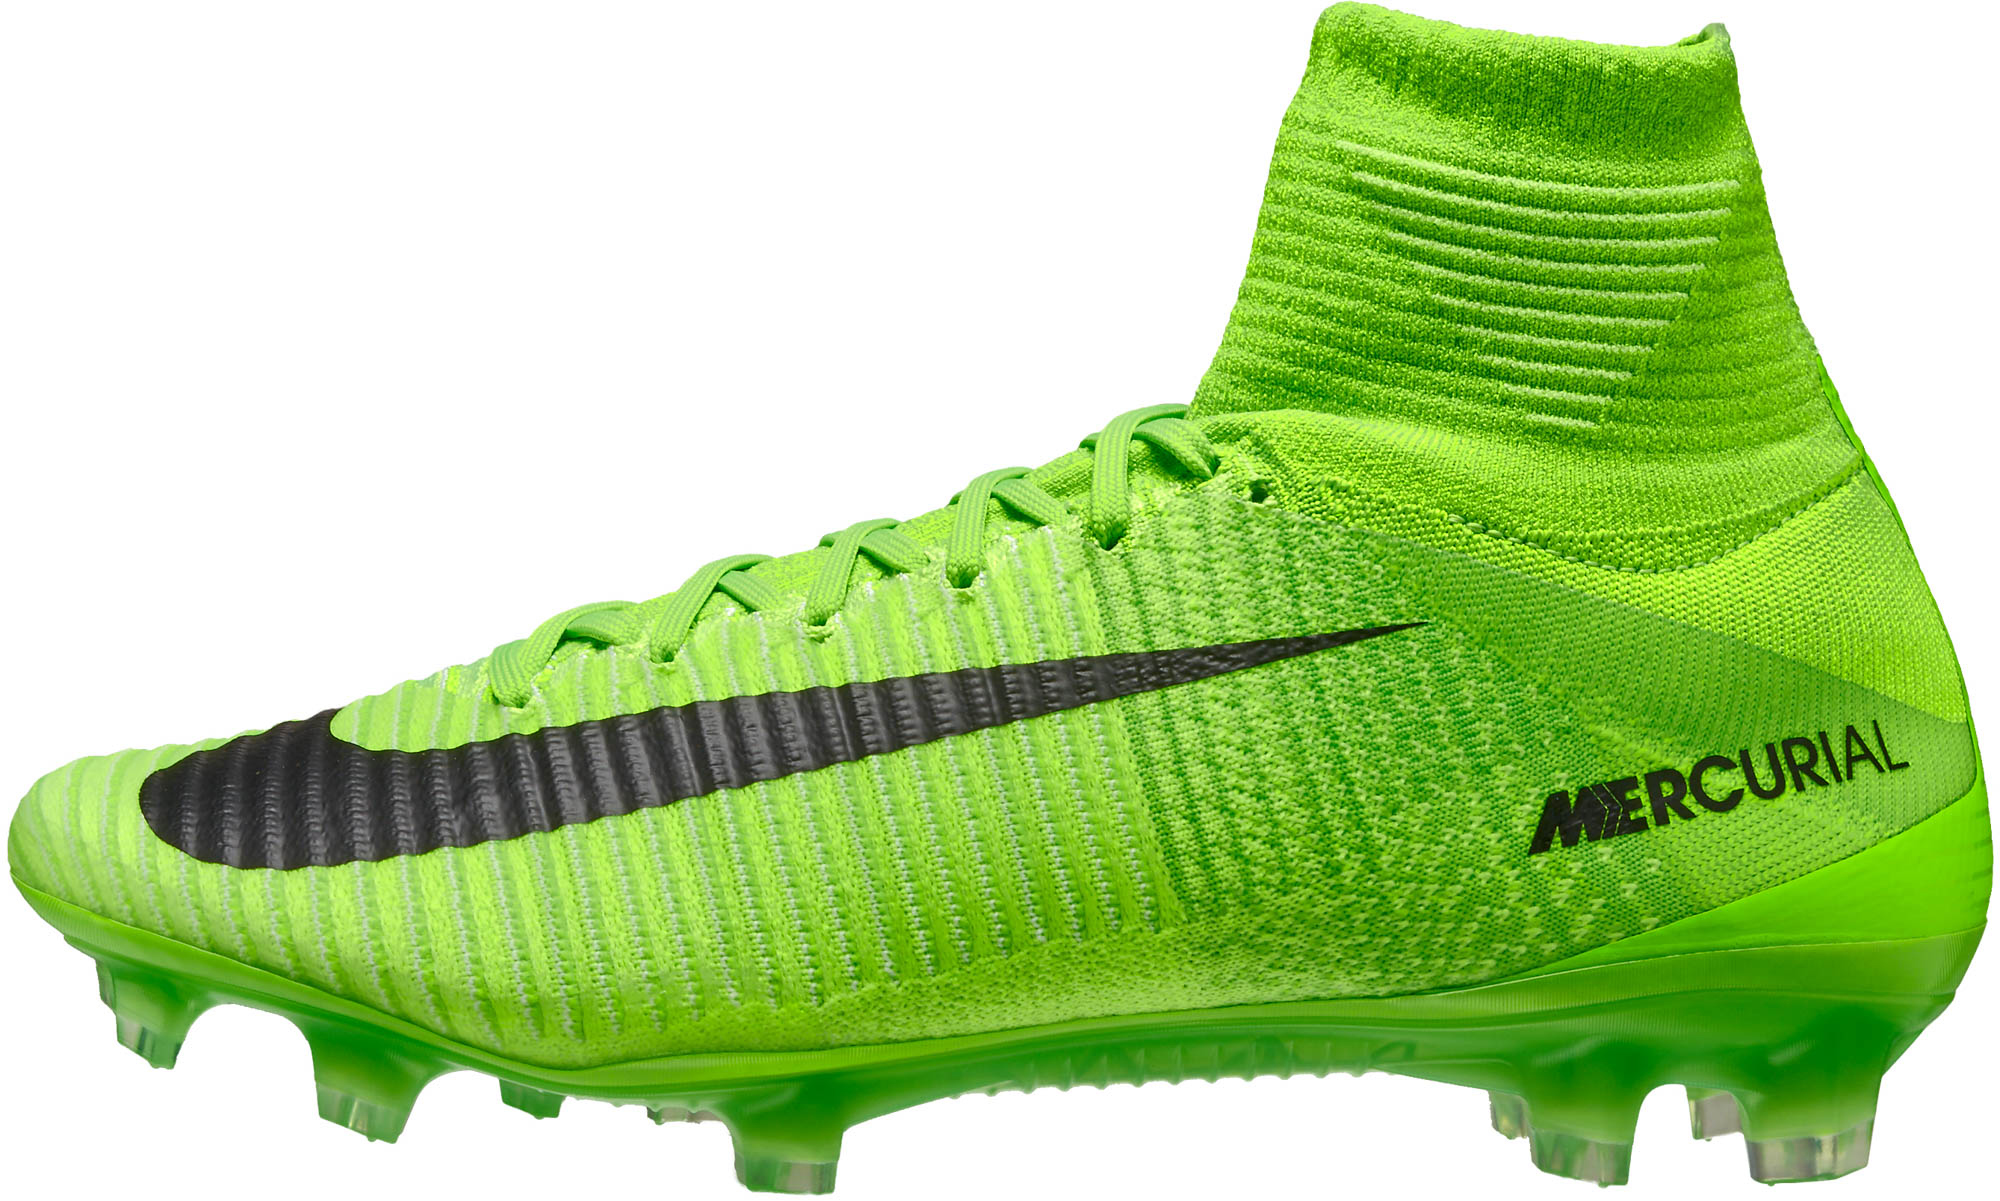 Nike Mercurial Superfly V FG - Green Superfly Cleats